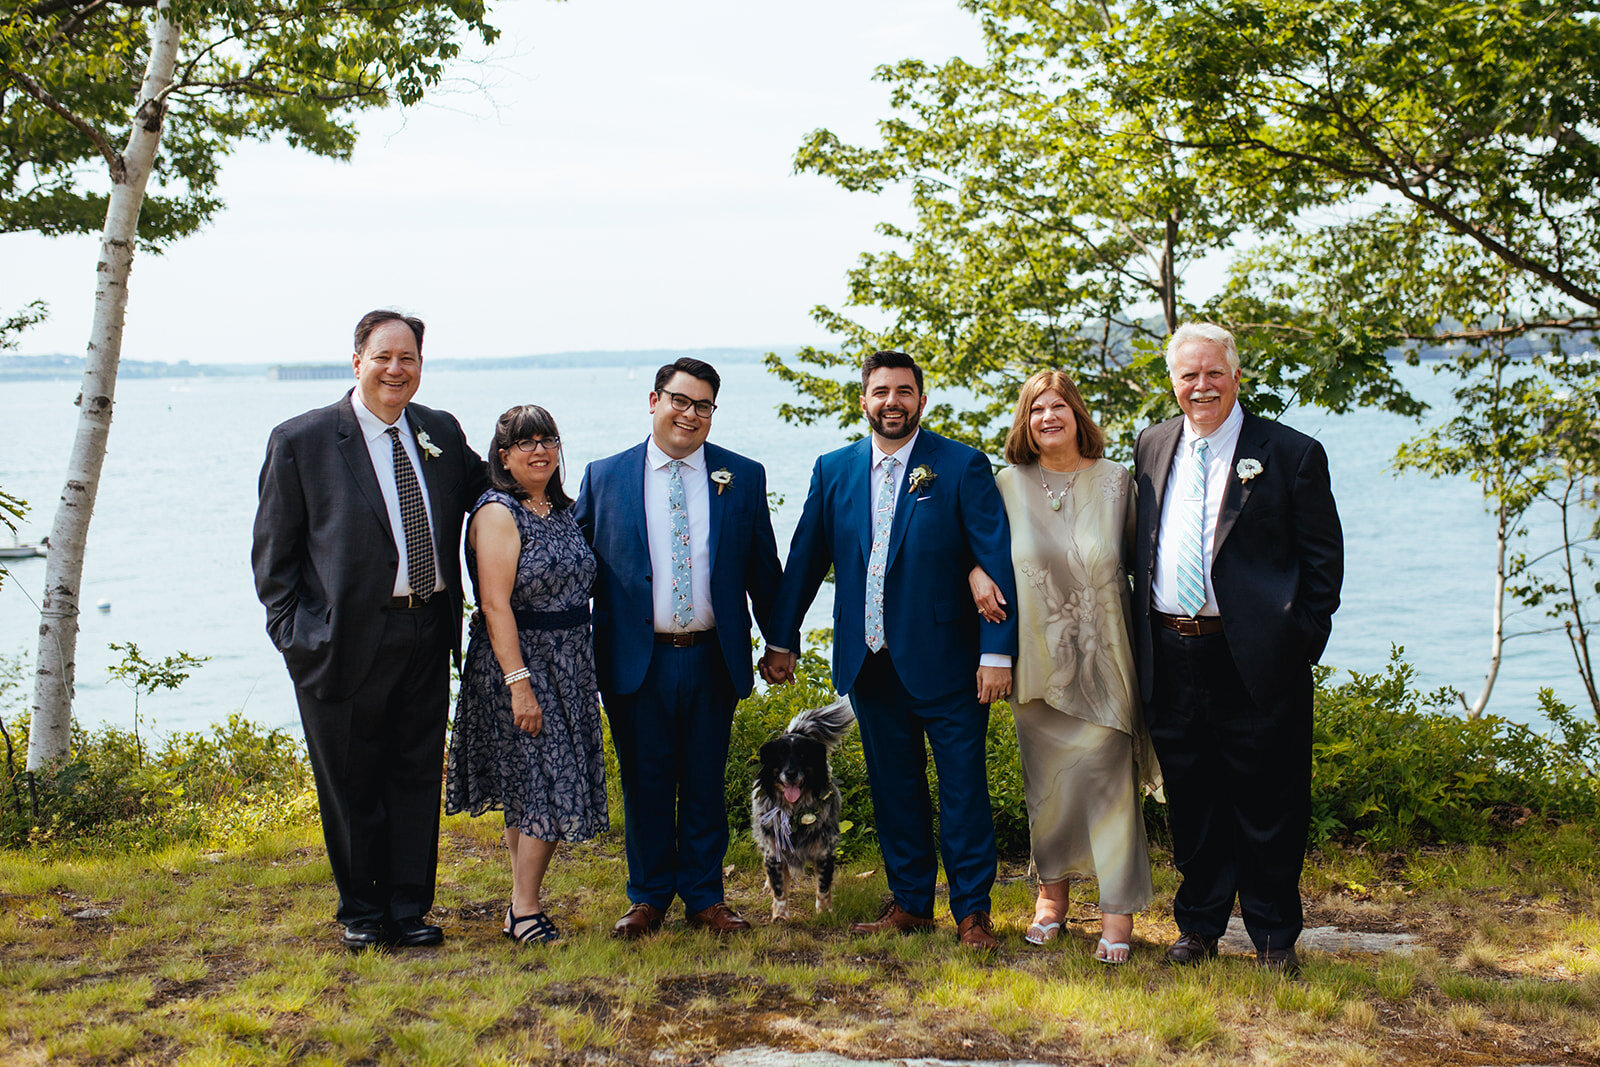 Grooms posing with family and dog on Peaks Island Portland ME Shawnee Custalow Queer wedding photography